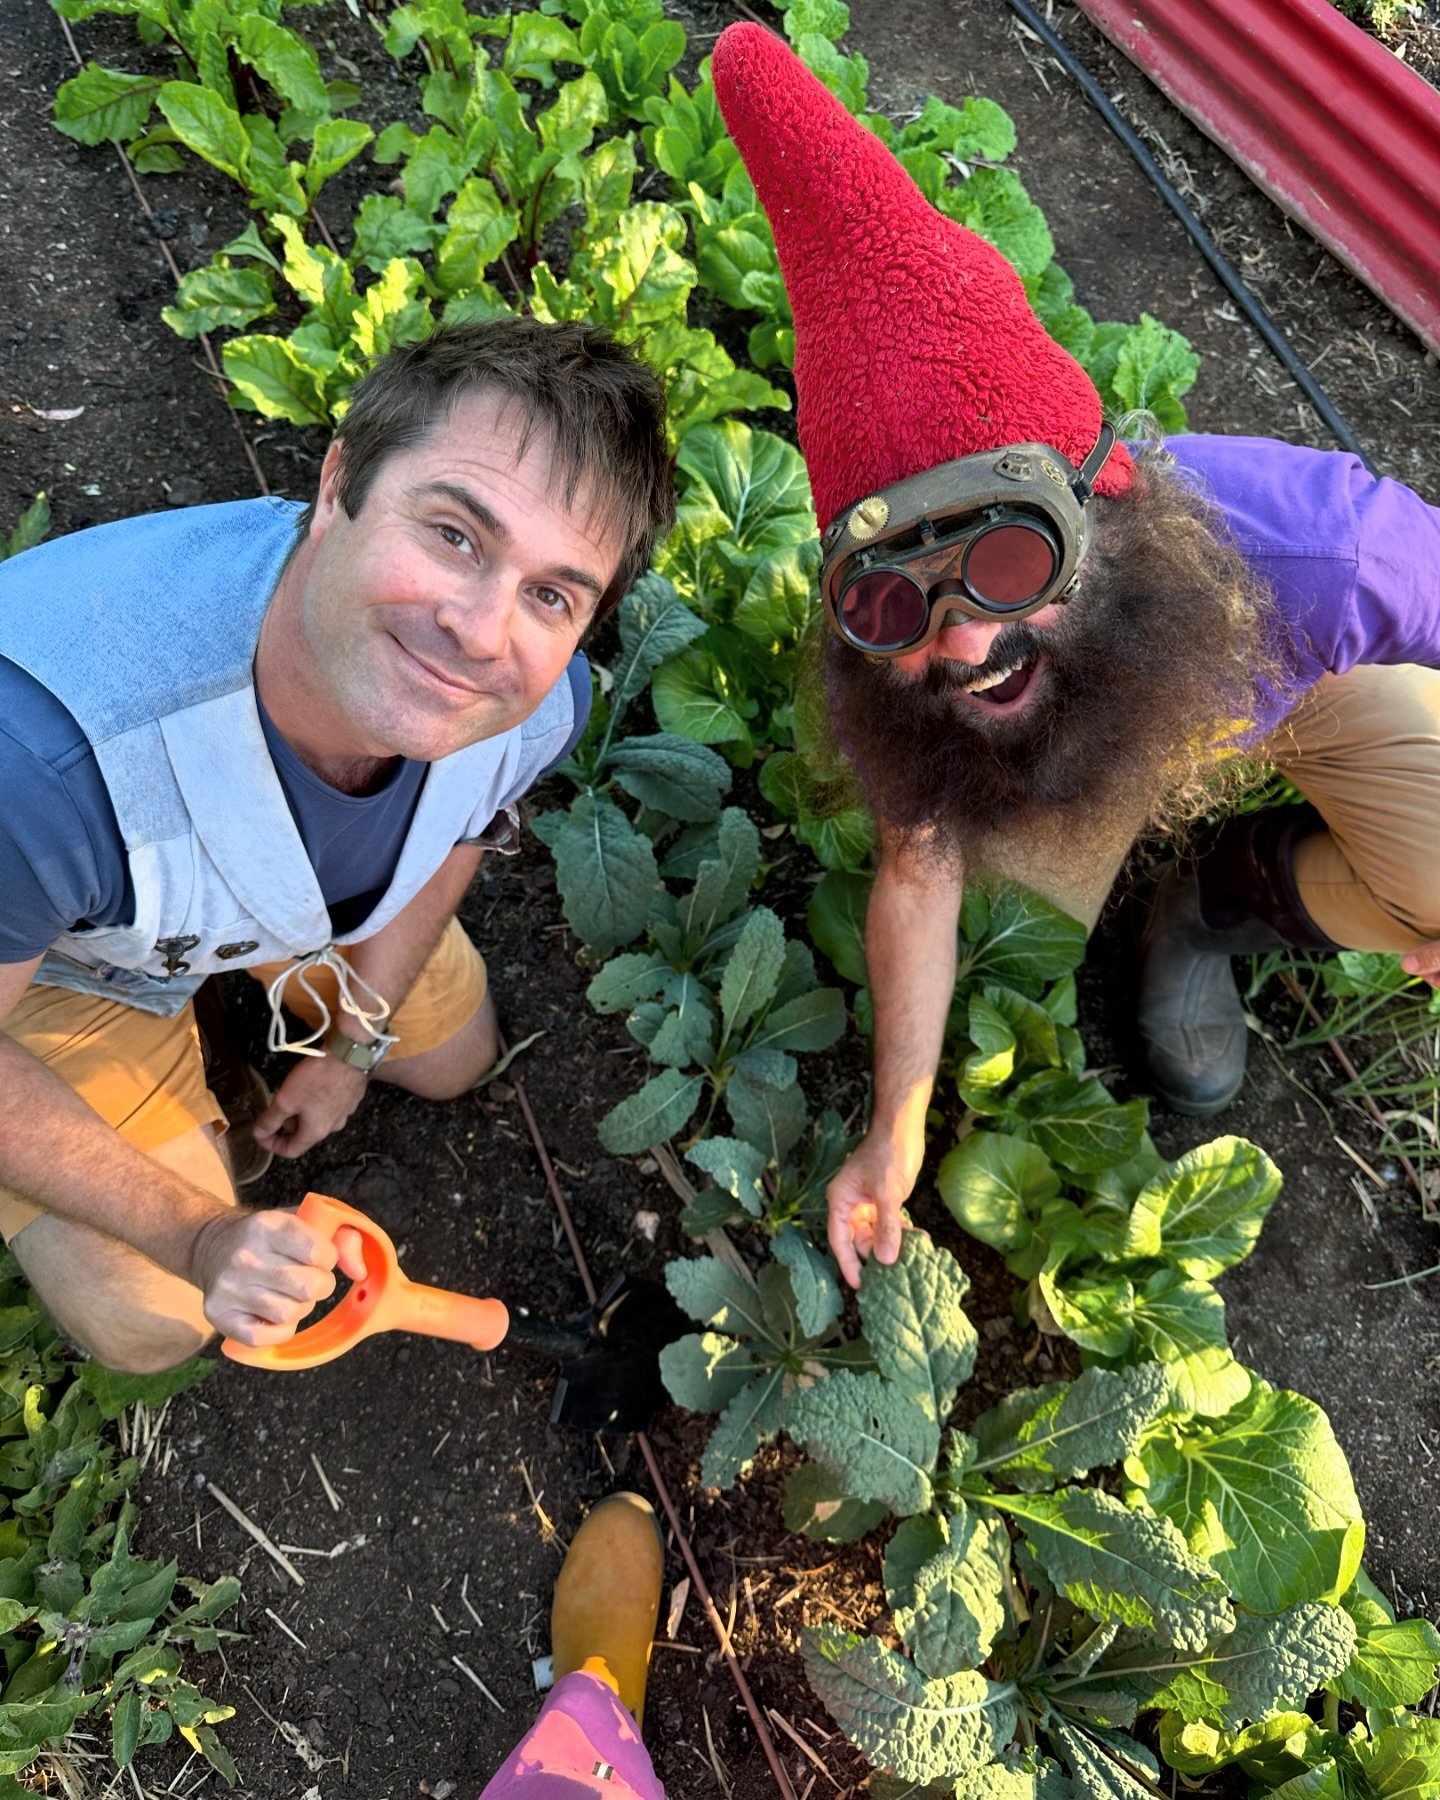 We are having the best time over here on Arrernte country. Today we popped into one of our most favourite community gardens&hellip;. The @alice_springs_community_garden ! Was so great to catch up with some old friends &amp; admire all the flourishing